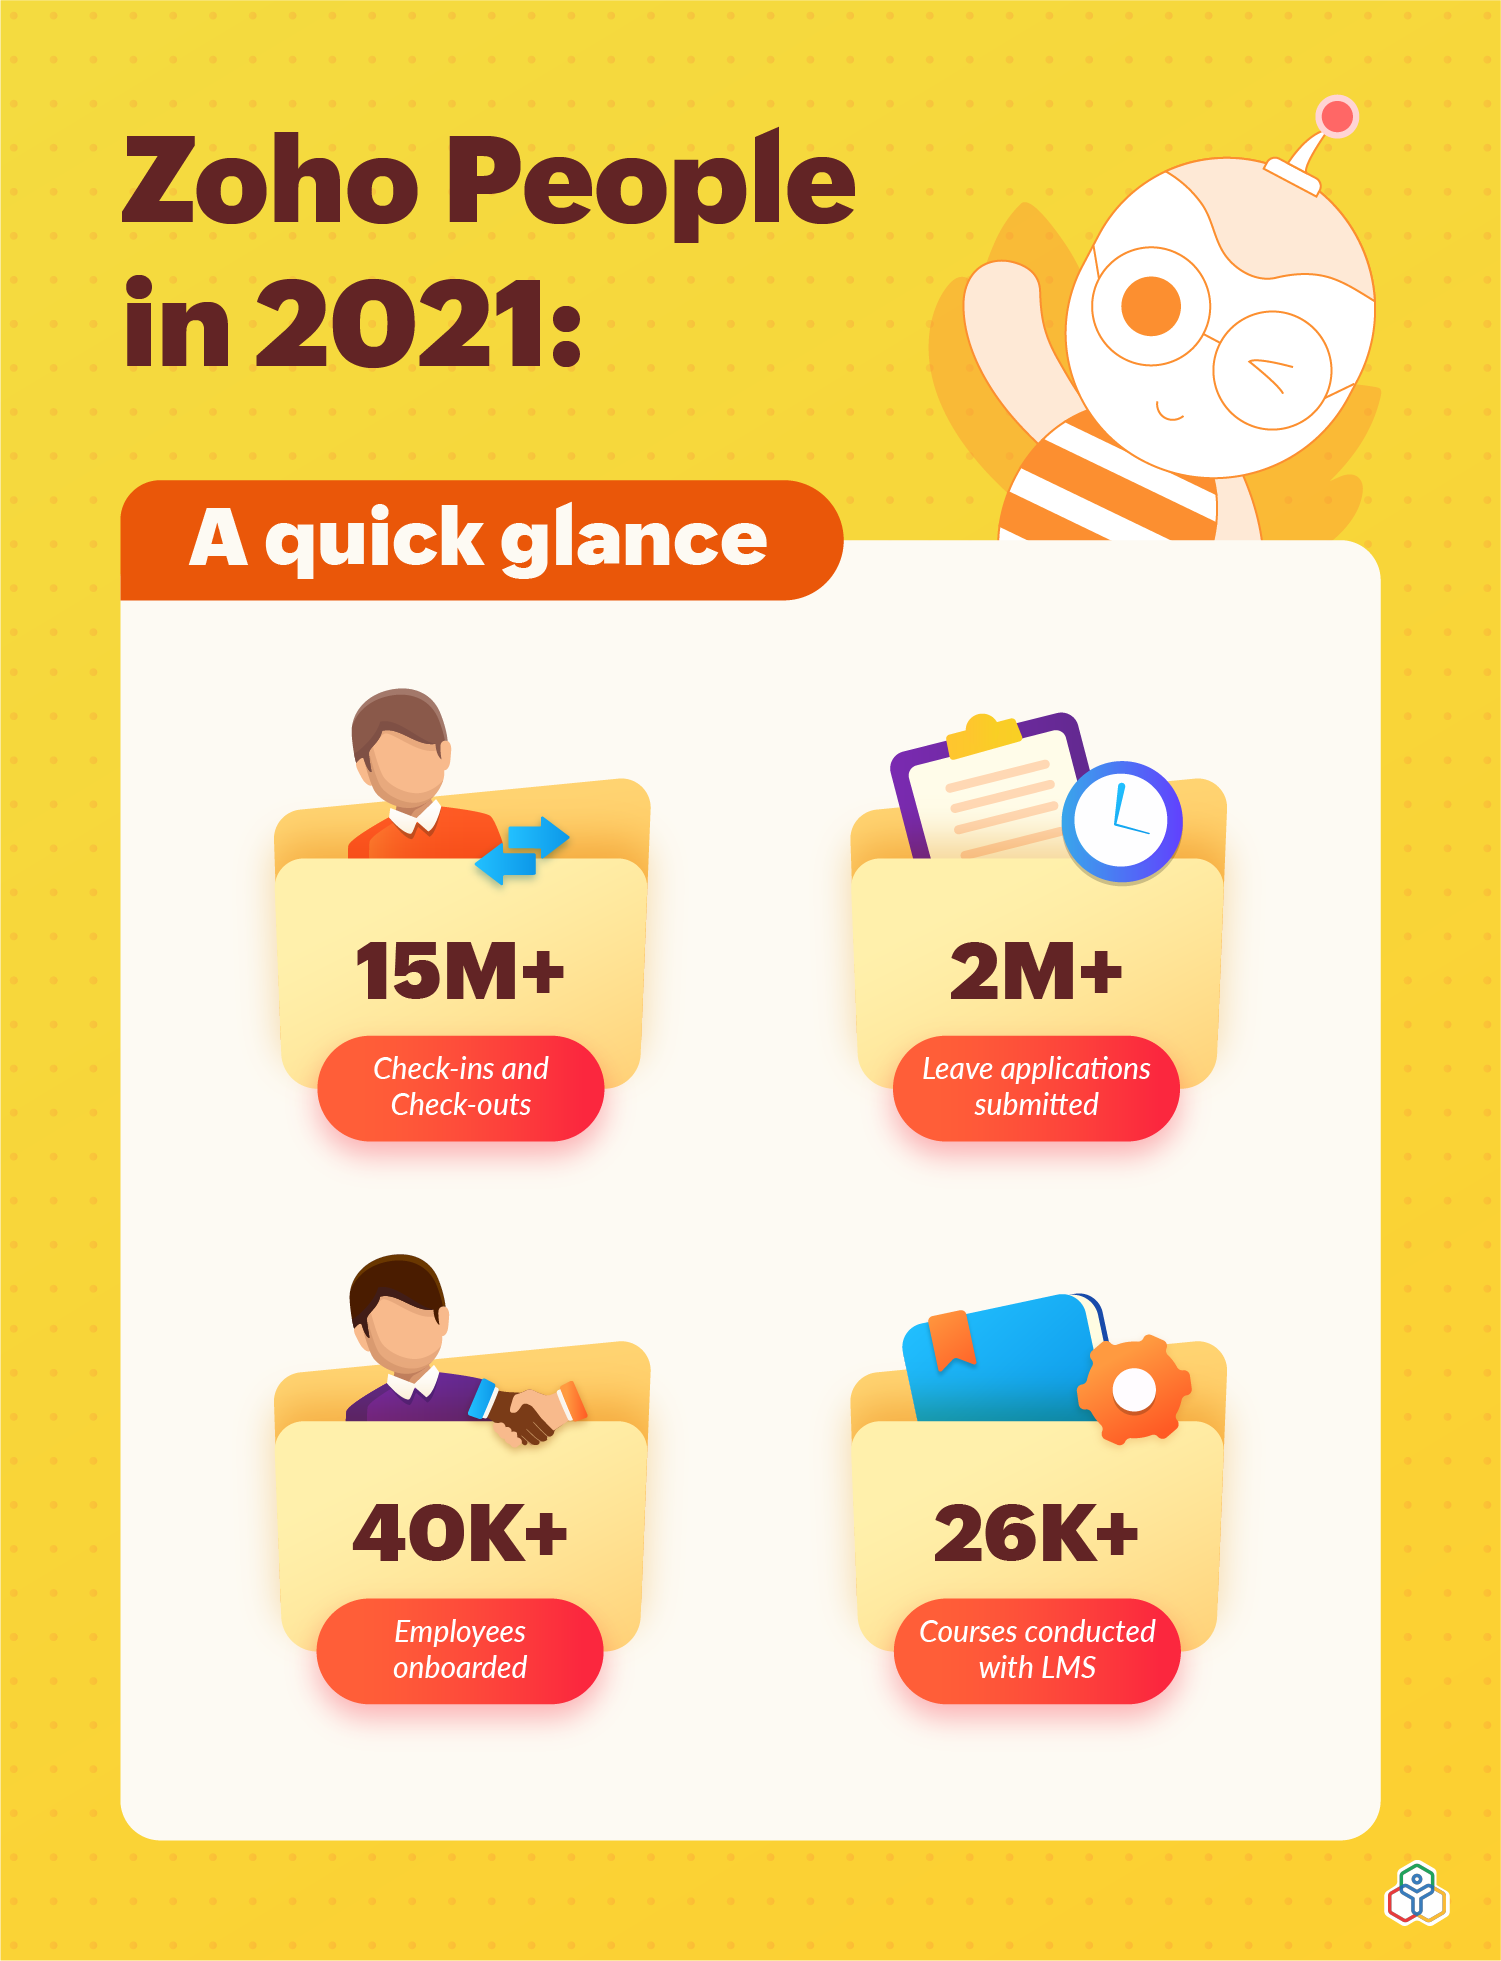 Zoho People in 2021 -  A quick glance